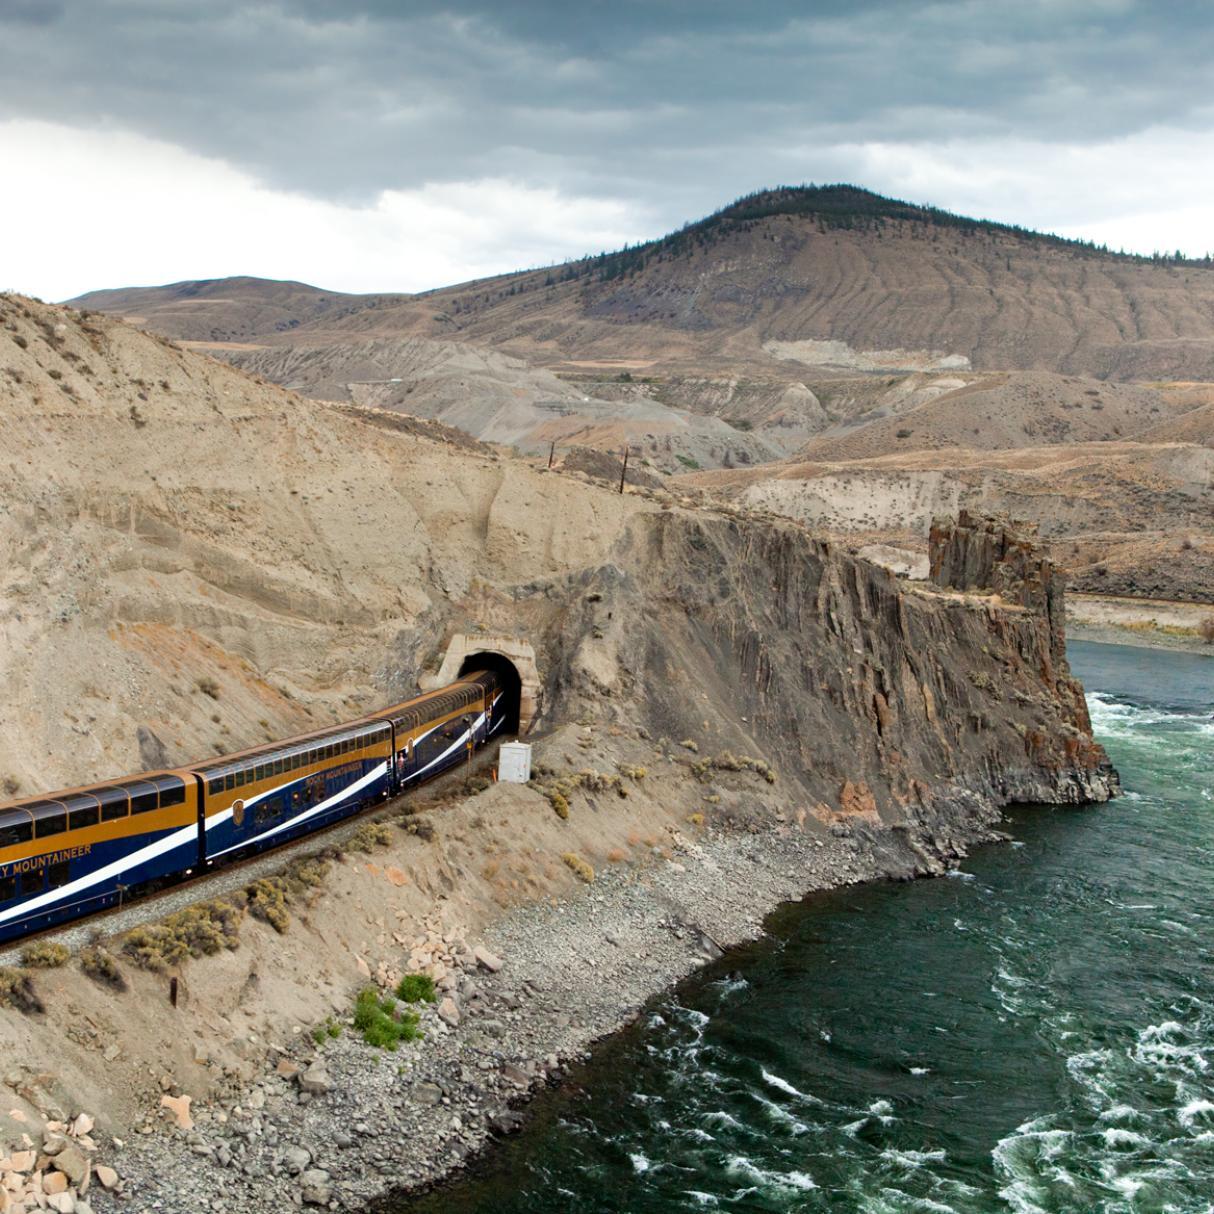 The Rocky Mountaineer train traveling through a mountain tunnel